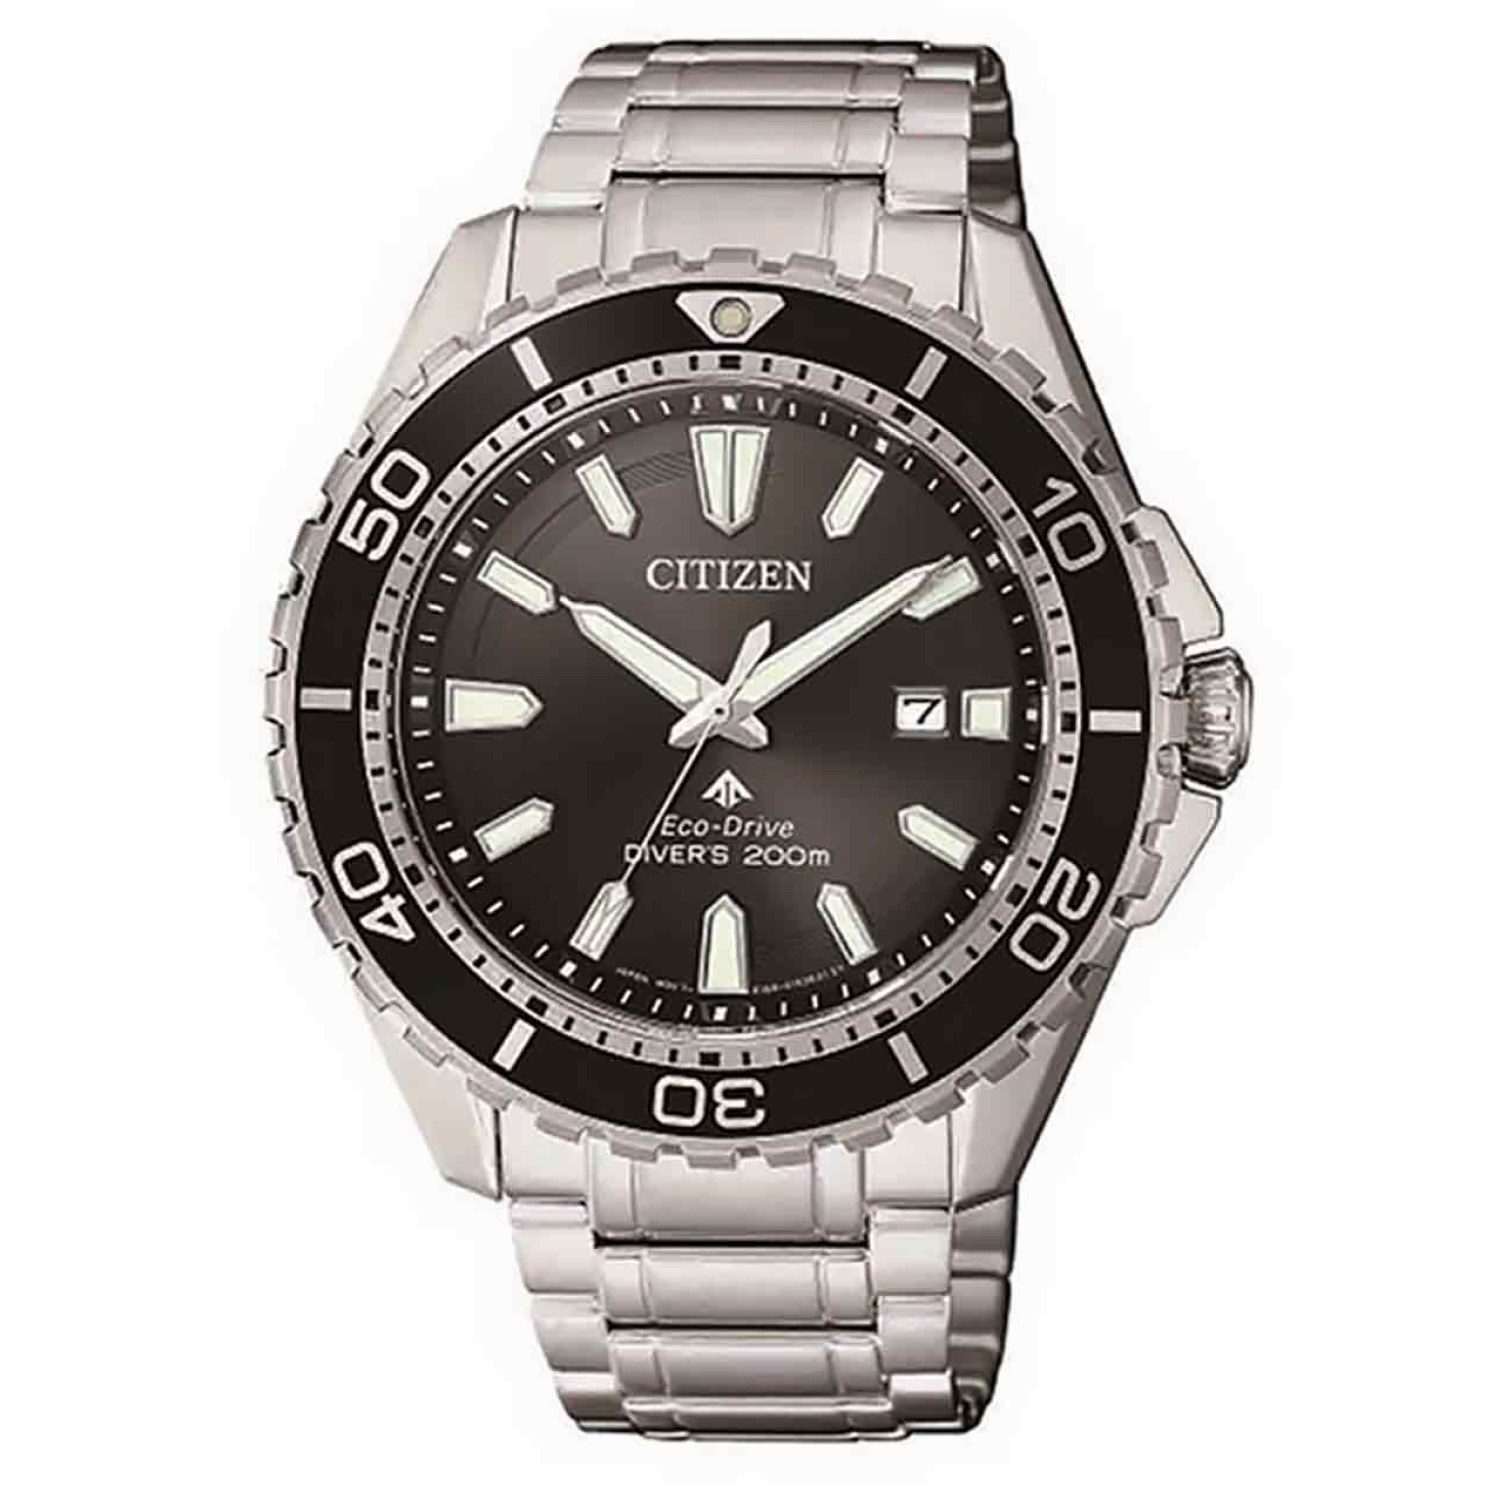 BN0190-82E Citizen Eco-Drive Promaster Dive Watch. With extensive functionality and durable construction, this watch is built to accompany you on your underwater adventures. Awarded ISO 6425 approval, it is the ultimate diving companion, featuring WR200, 